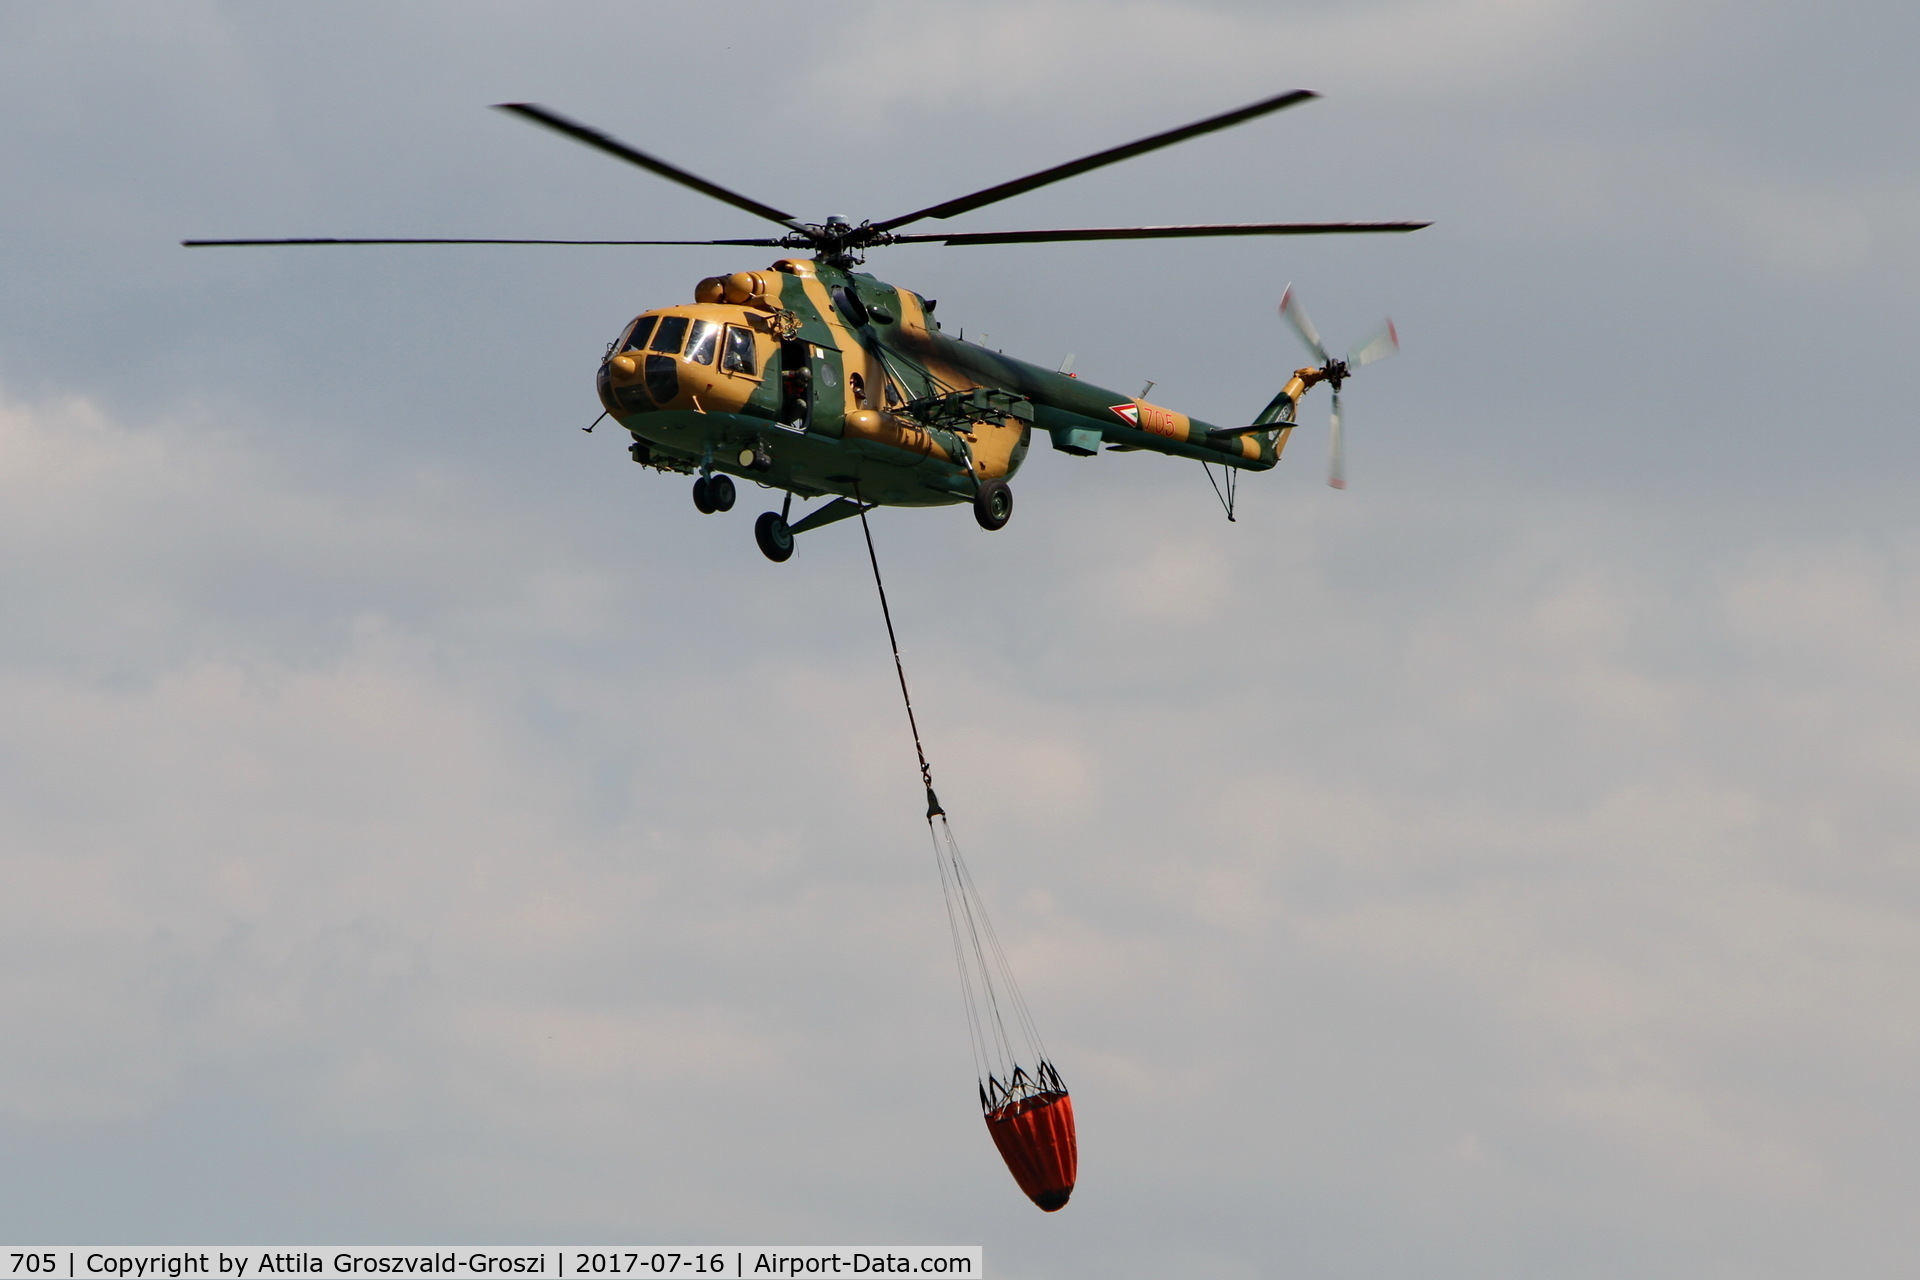 705, 1987 Mil Mi-17N C/N 104M05, Purchase of fire water with Bambi-bucket. In the Öskü airspace, Hungary